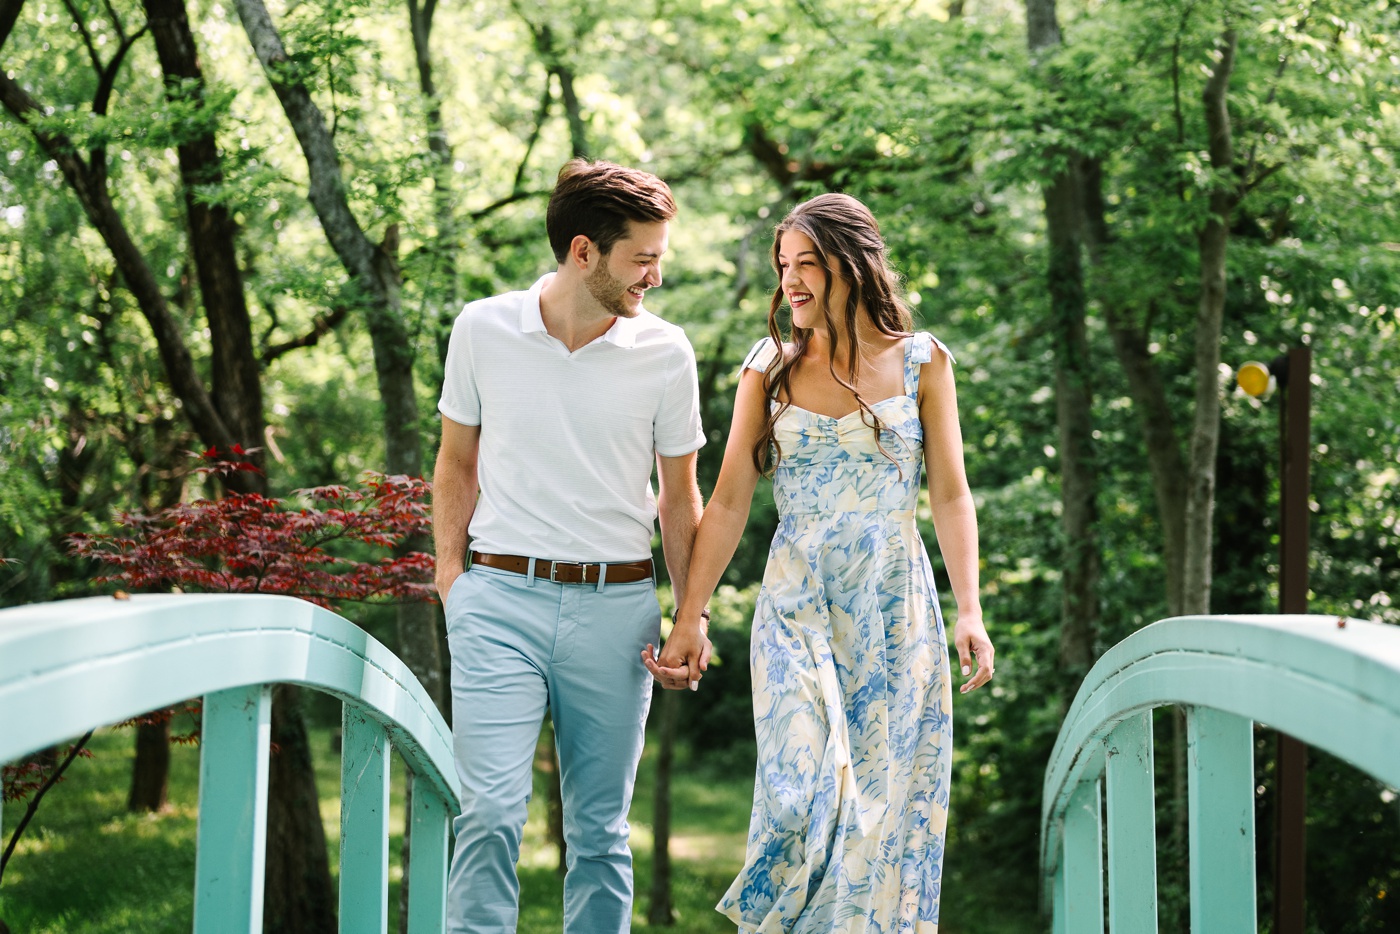 Blue and white engagement session outfits